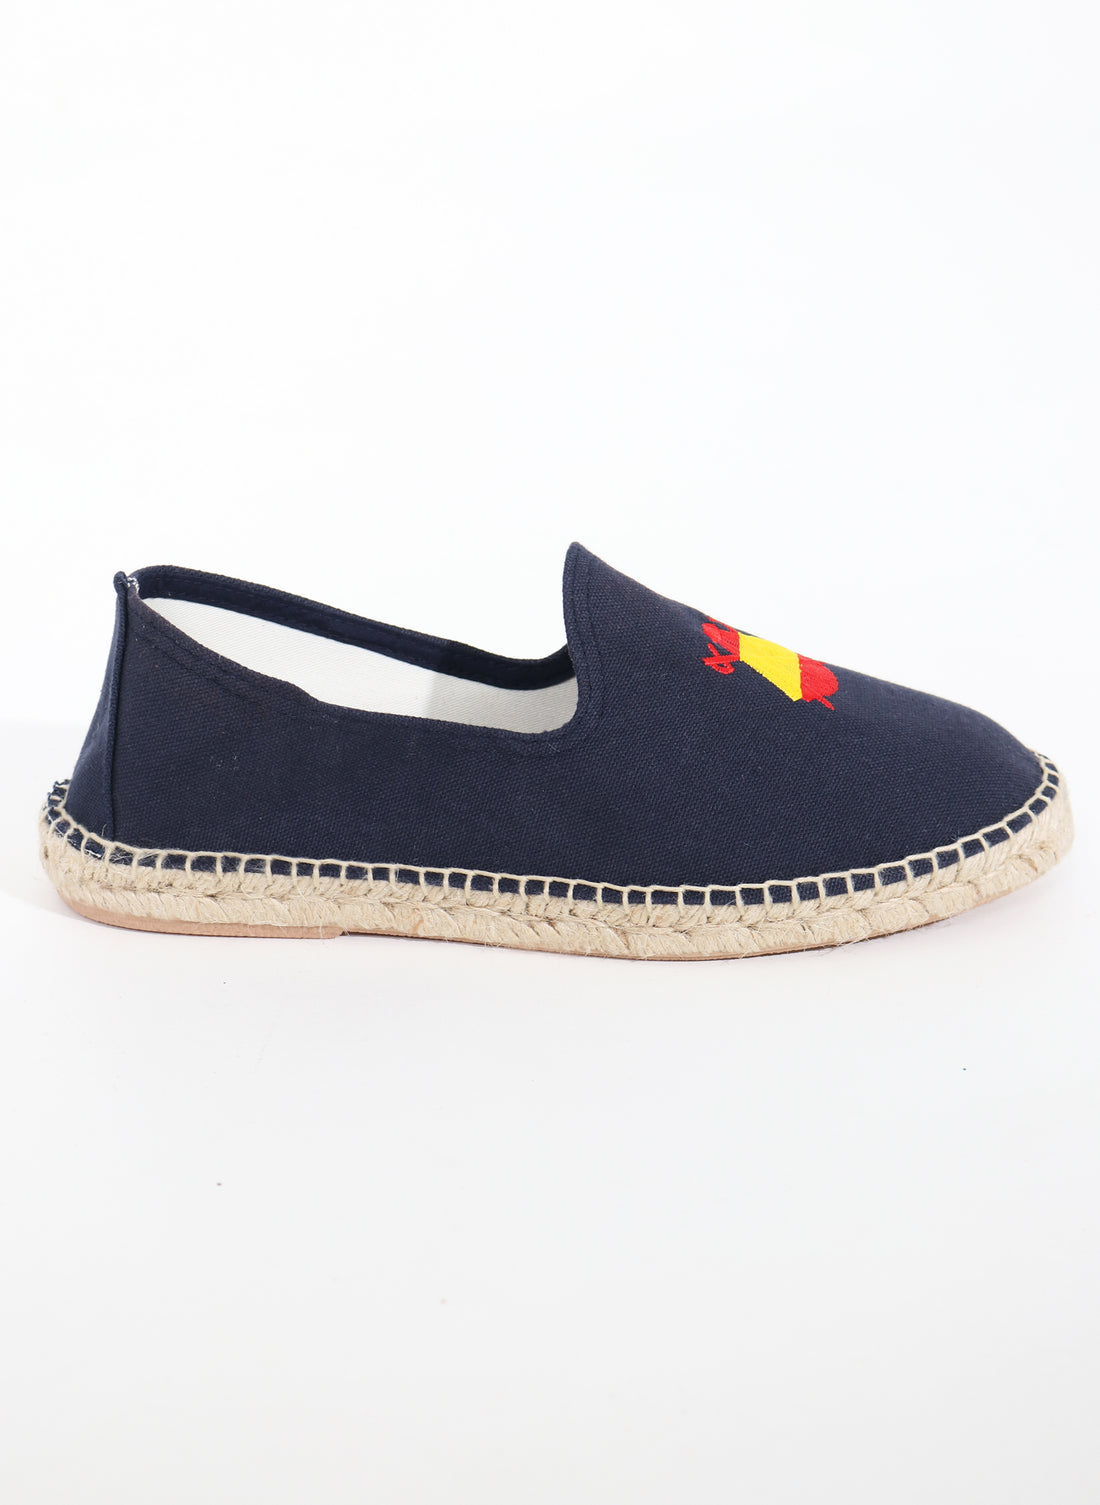 Men's Navy Blue Embroidered Capote Espadrilles Spain